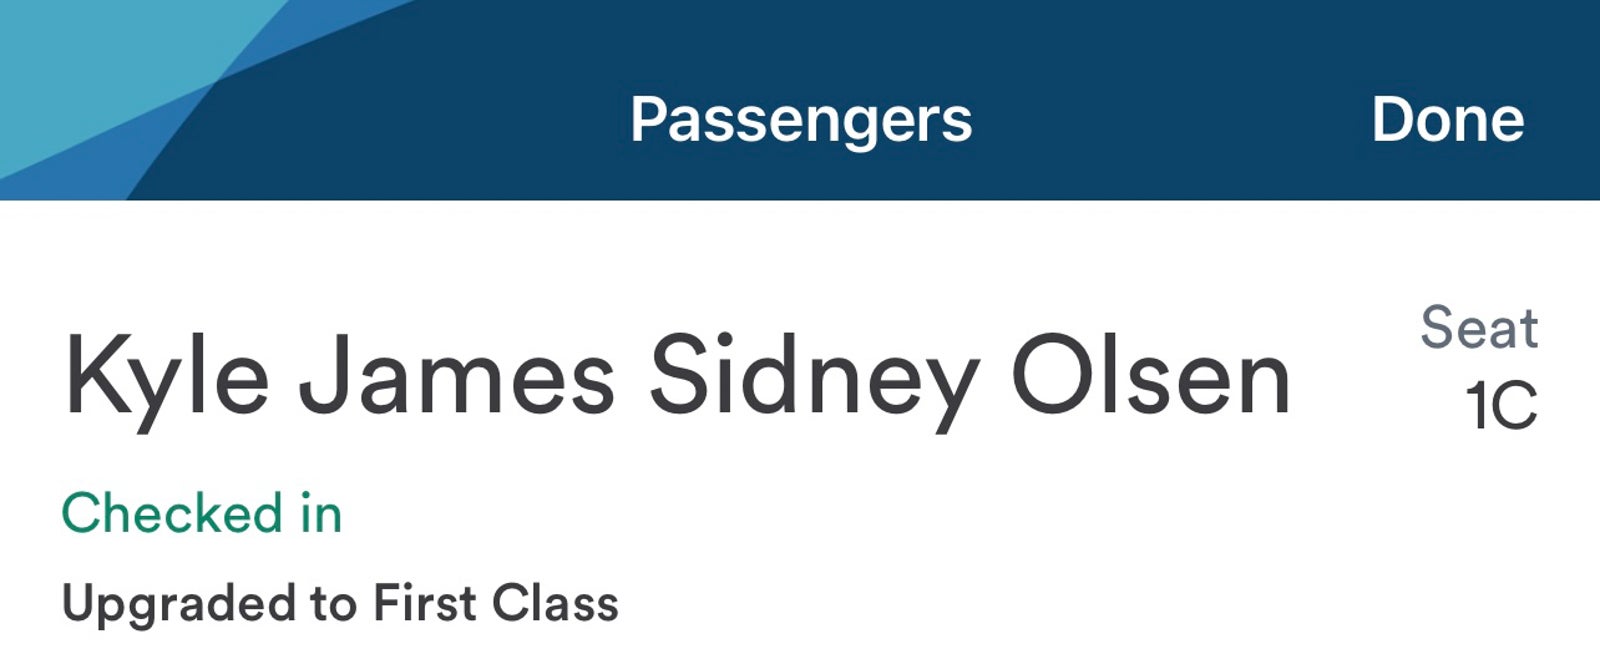 Confirmed in first class Alaska Airlines